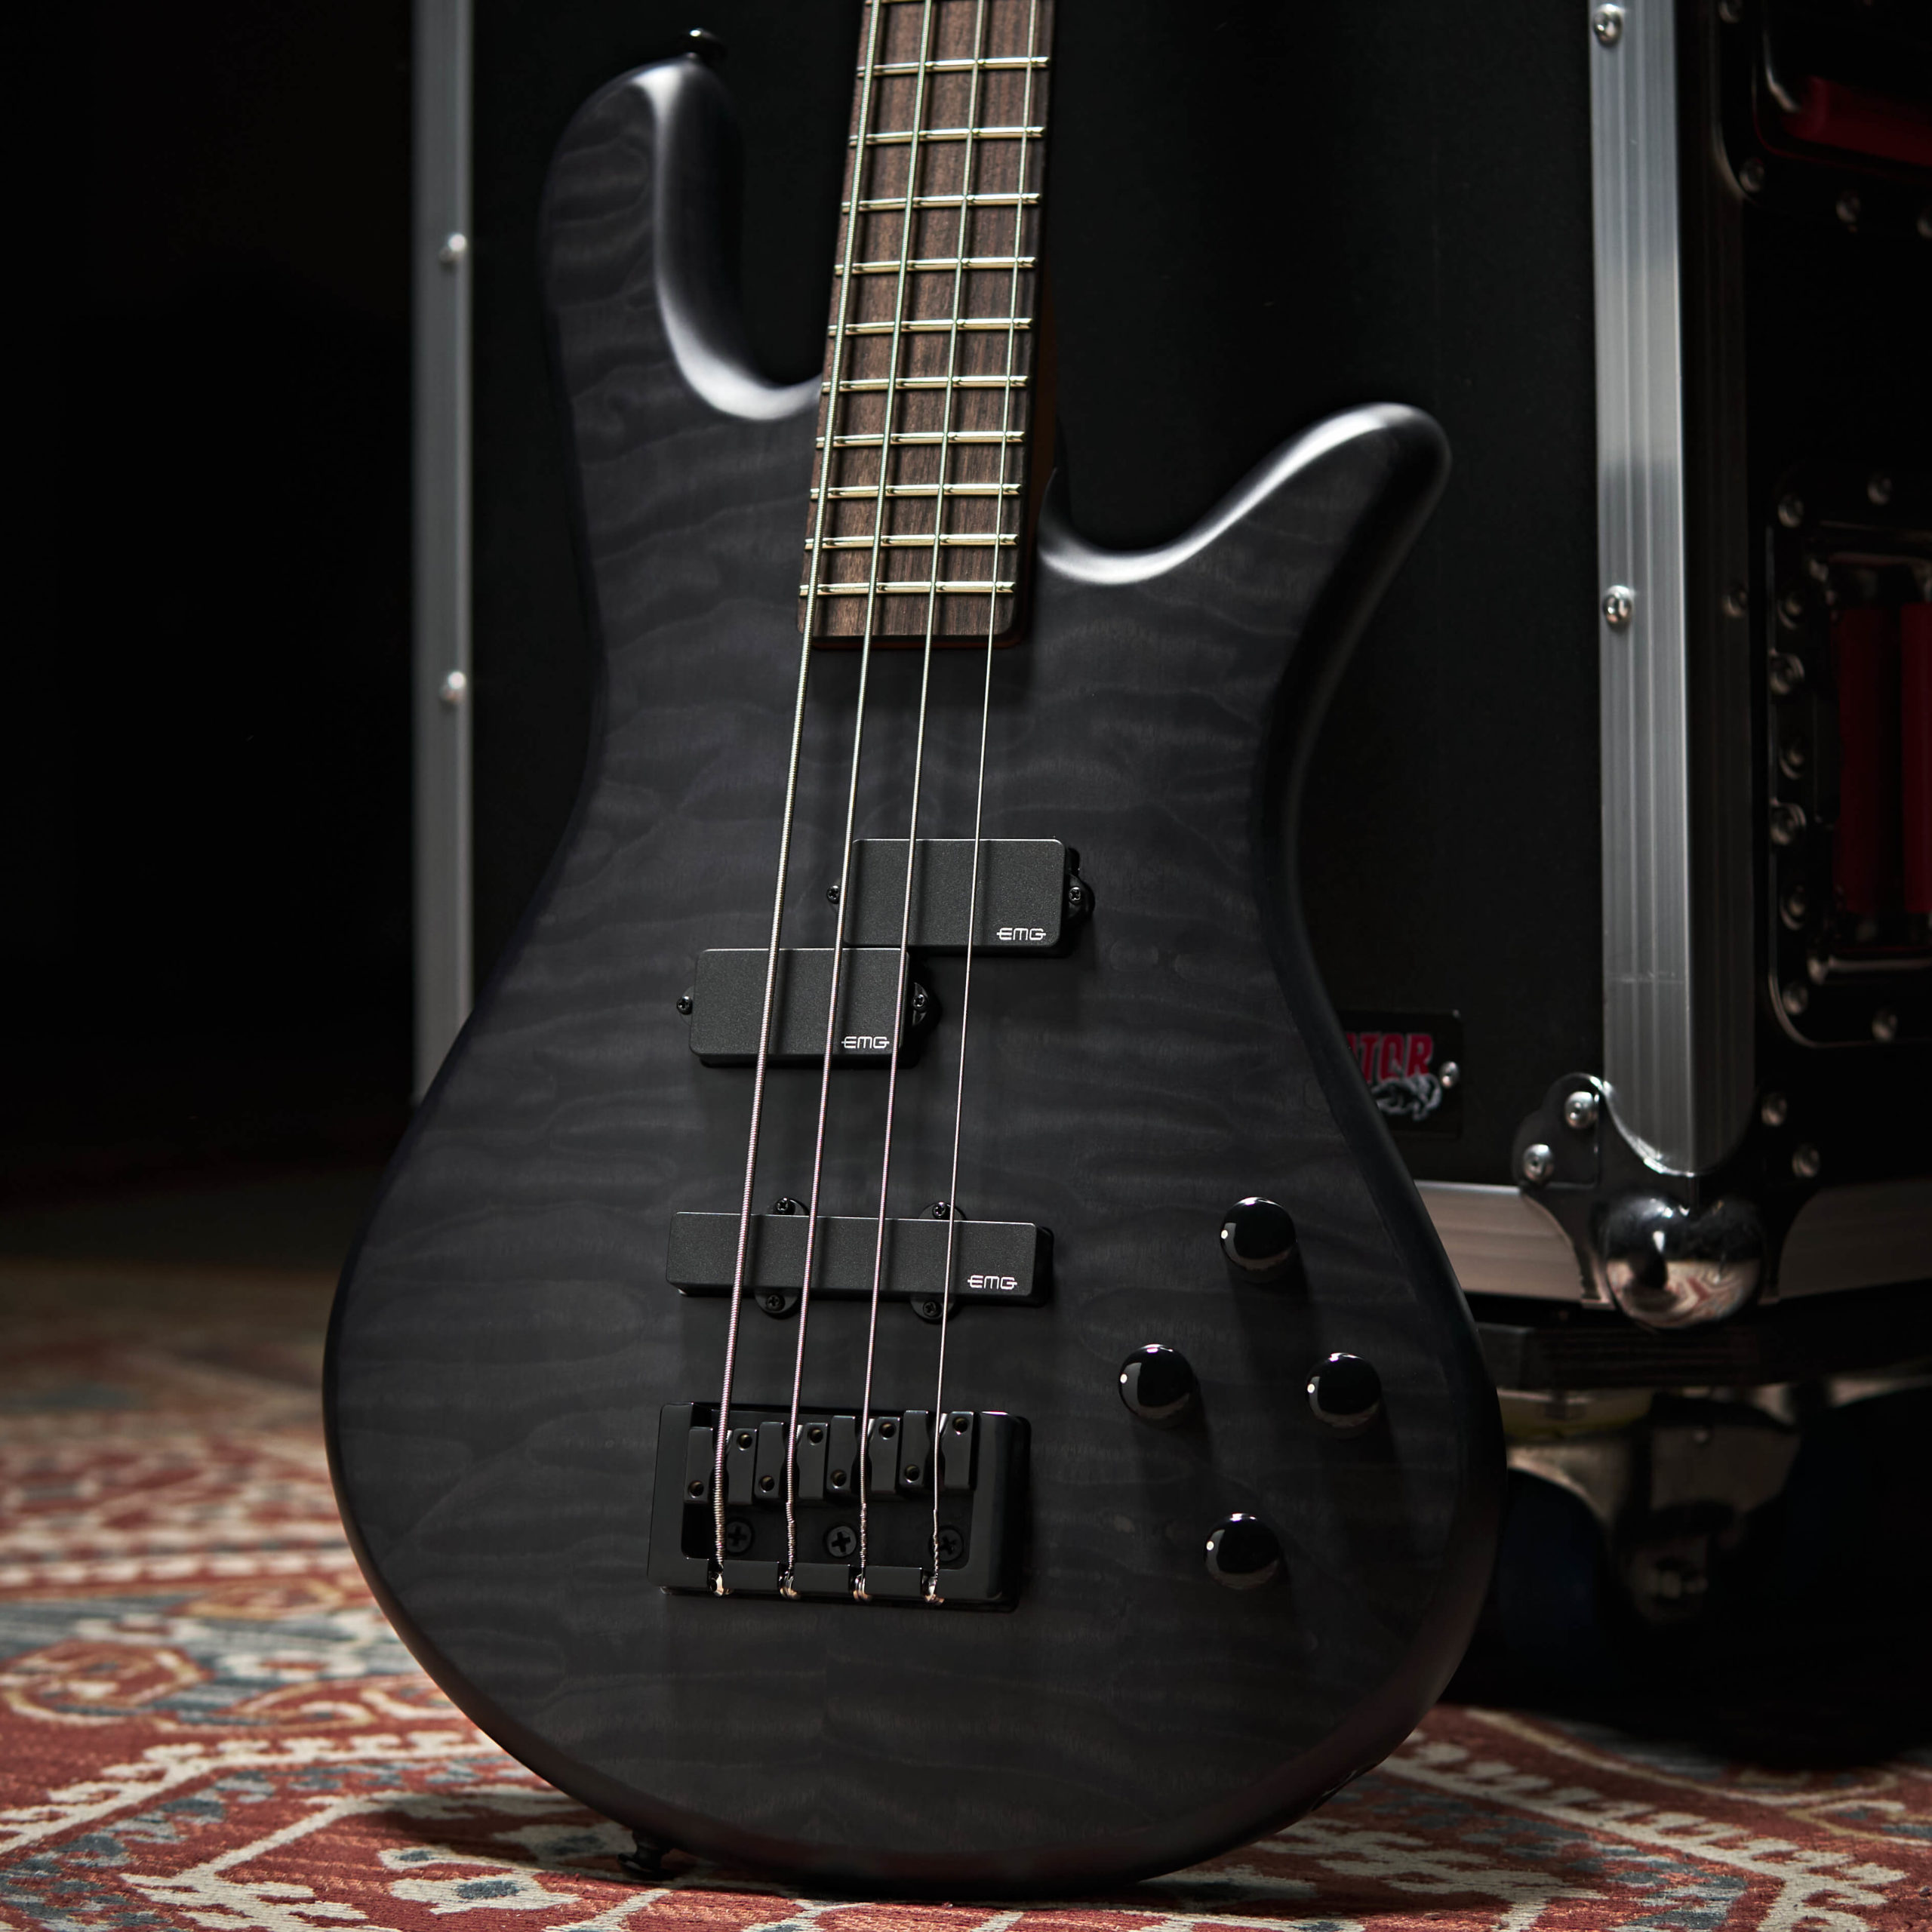 Spector Ns Pulse Ii 4c Active Emg Eb - Black Stain Matte - Solidbody E-bass - Variation 3